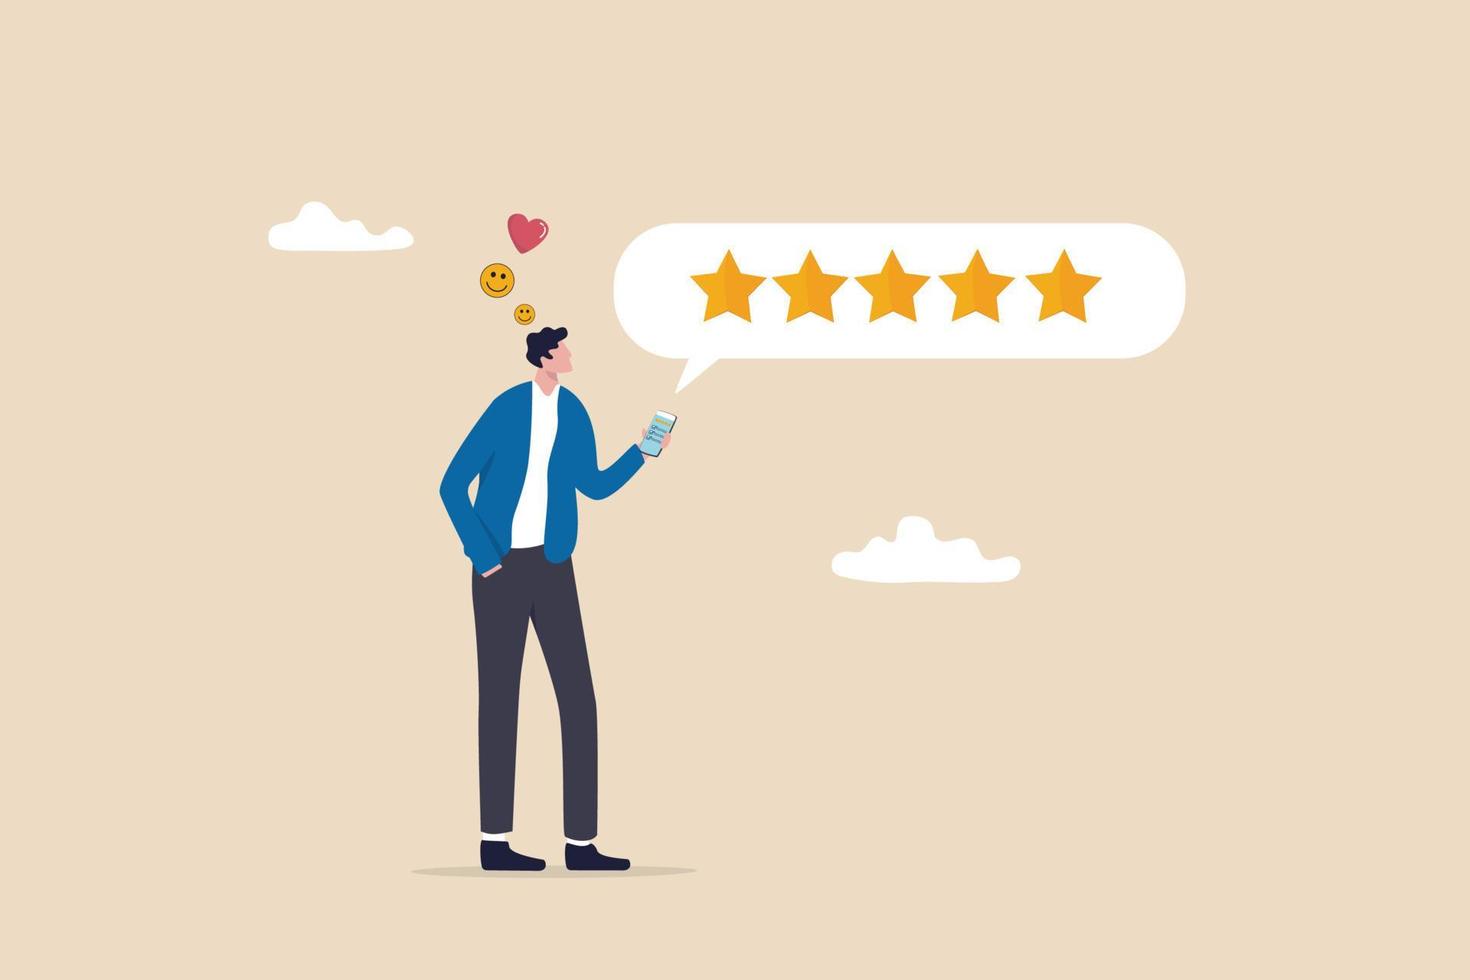 Customer feedback from mobile application, rating or user experience, scoring and satisfaction, product quality and online survey concept, satisfied man holding mobile giving 5 stars rating feedback. vector